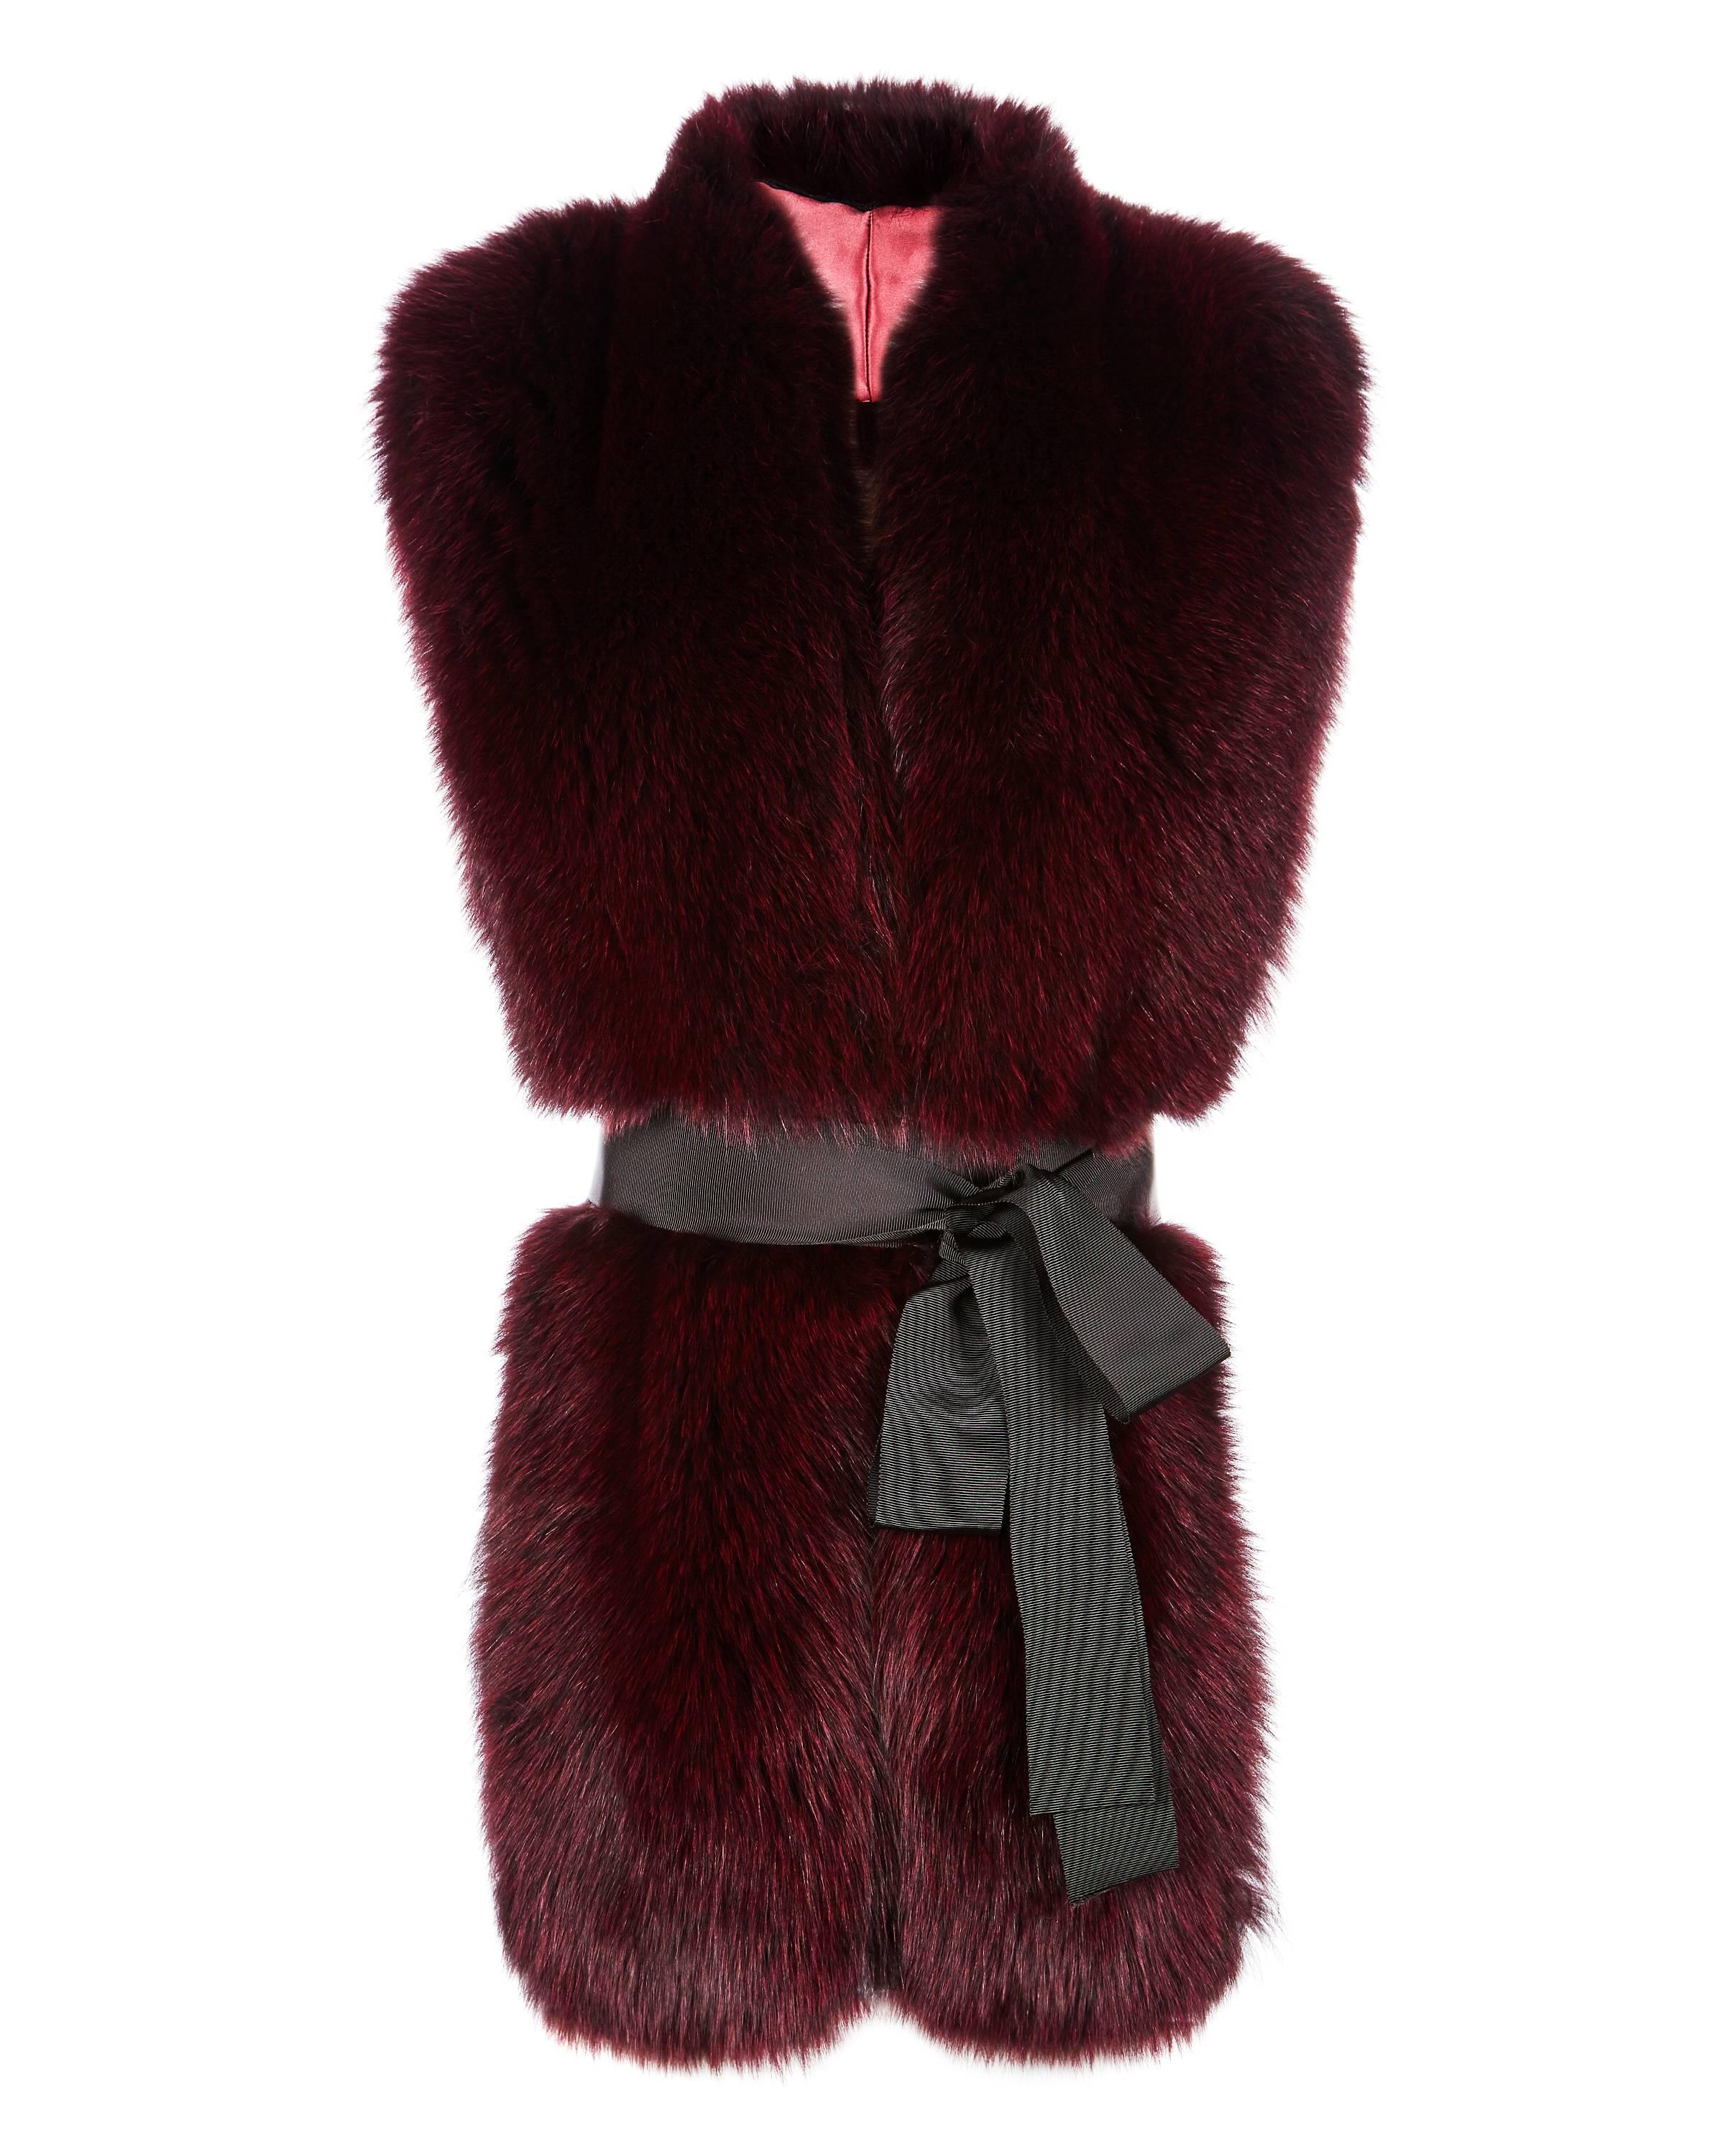 The Legacy Stole is Verheyen London’s versatile design to be worn from day to night. Crafted in the finest dyed fox fur and lined in coloured silk satin.  A structured design to wrap over your shoulders for a statement look with or without a